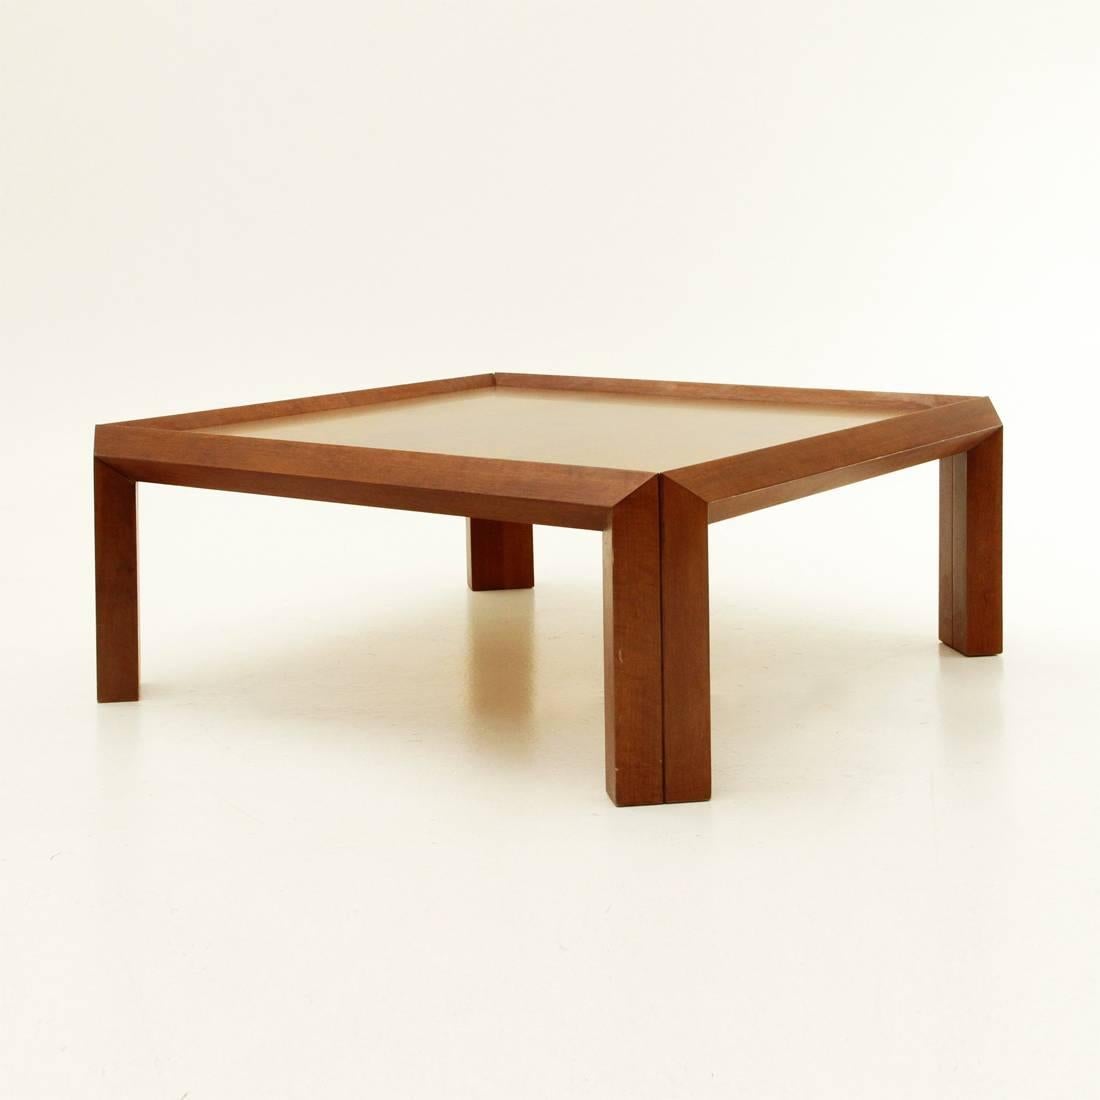 Square coffee table of Italian production.
Legs and edges gem cut, veneered wood top.
Good general conditions.

Dimensions: Width 95 cm - Depth 95 cm - Height 35 cm